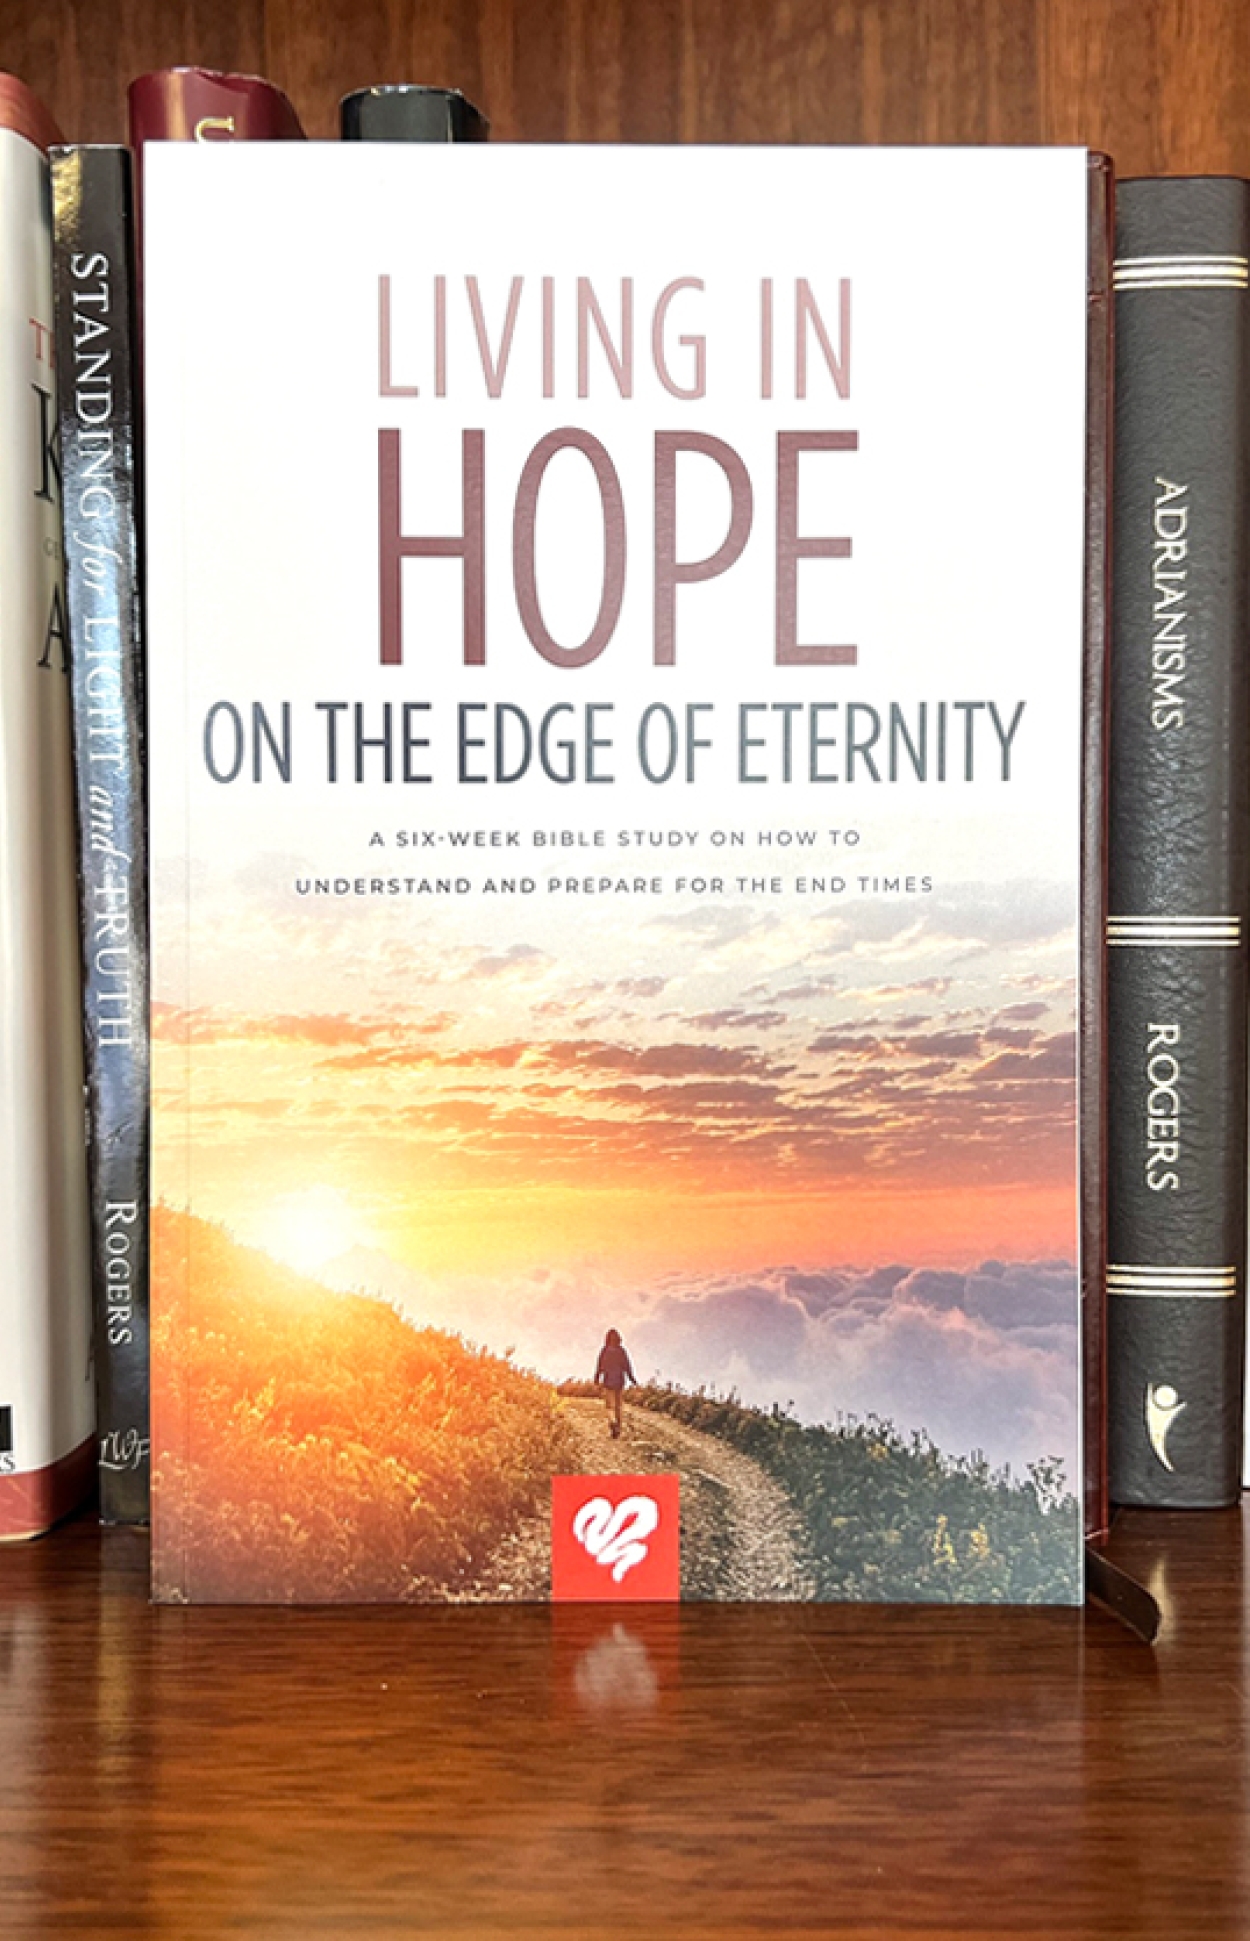 Bss157 living in hope on the edge of eternity bible study SHELF